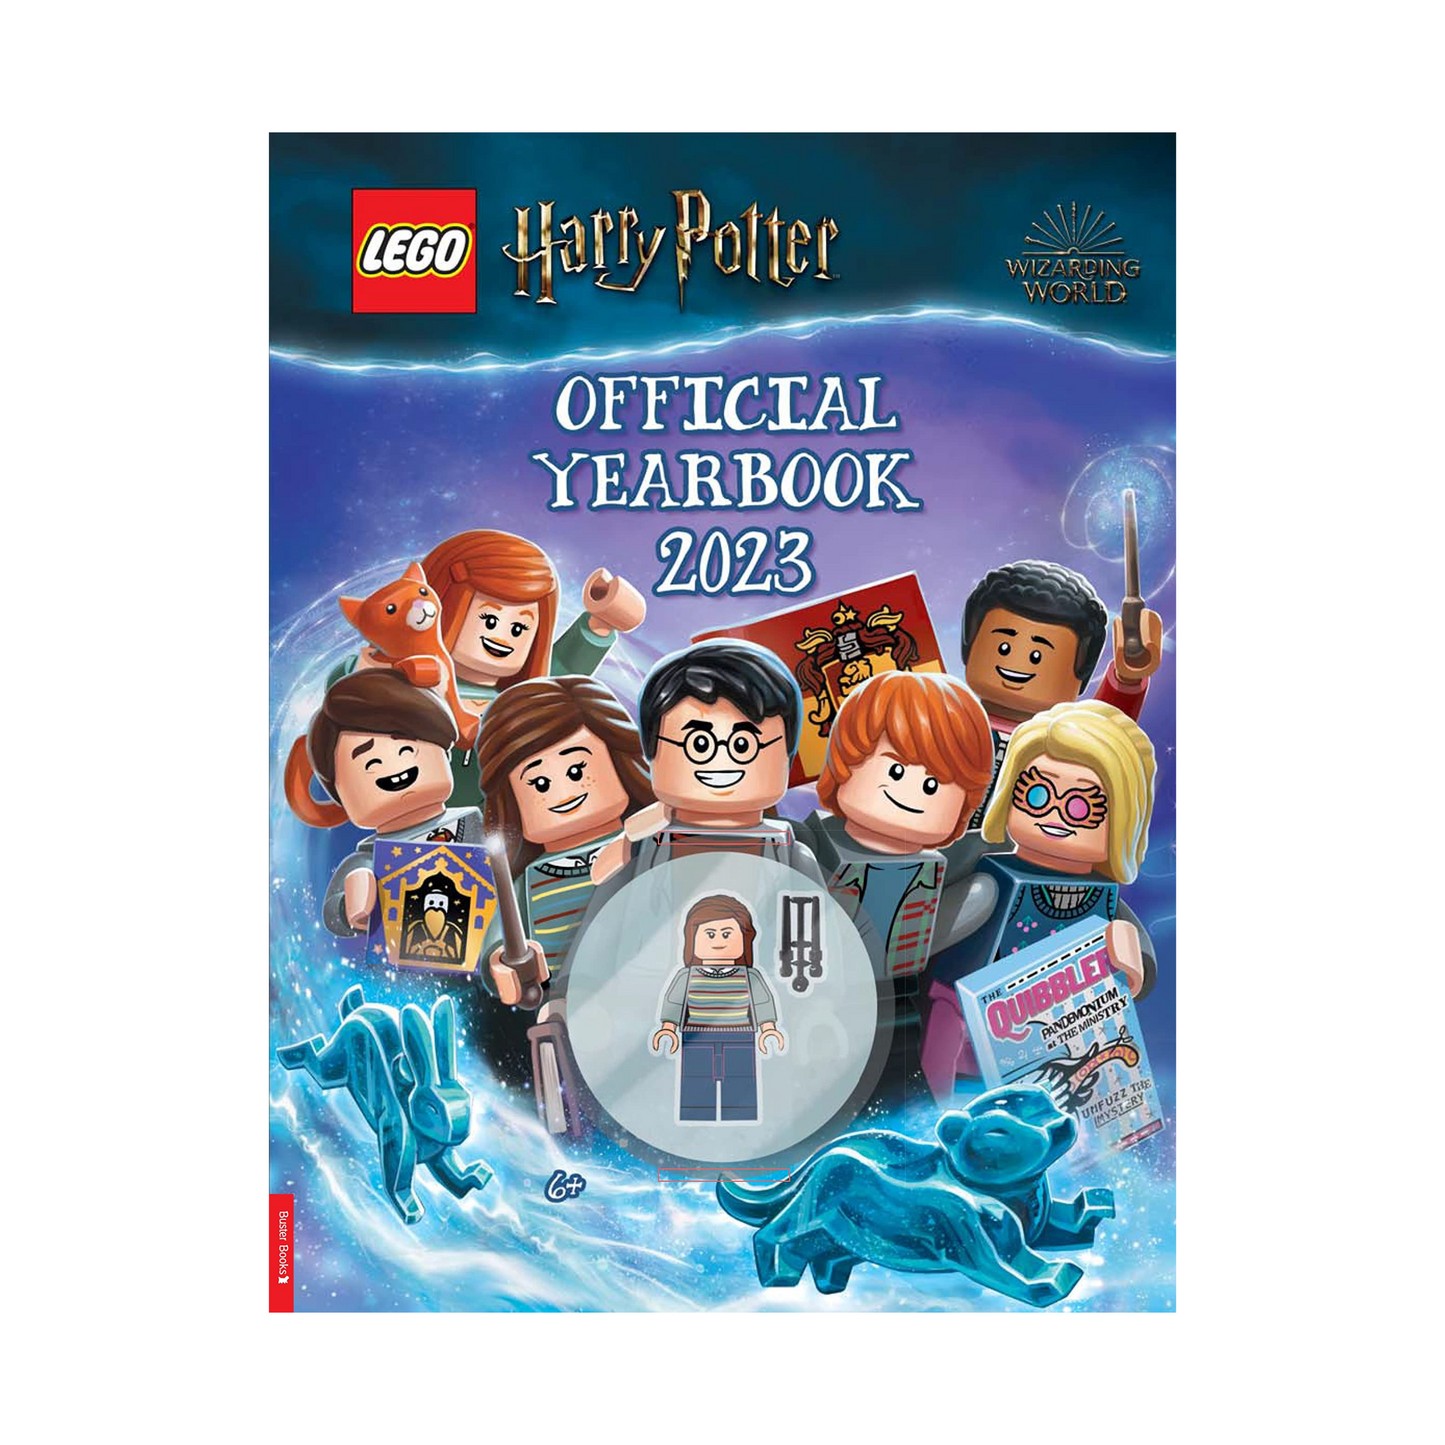 LEGO Harry Potter: Official Yearbook 2023